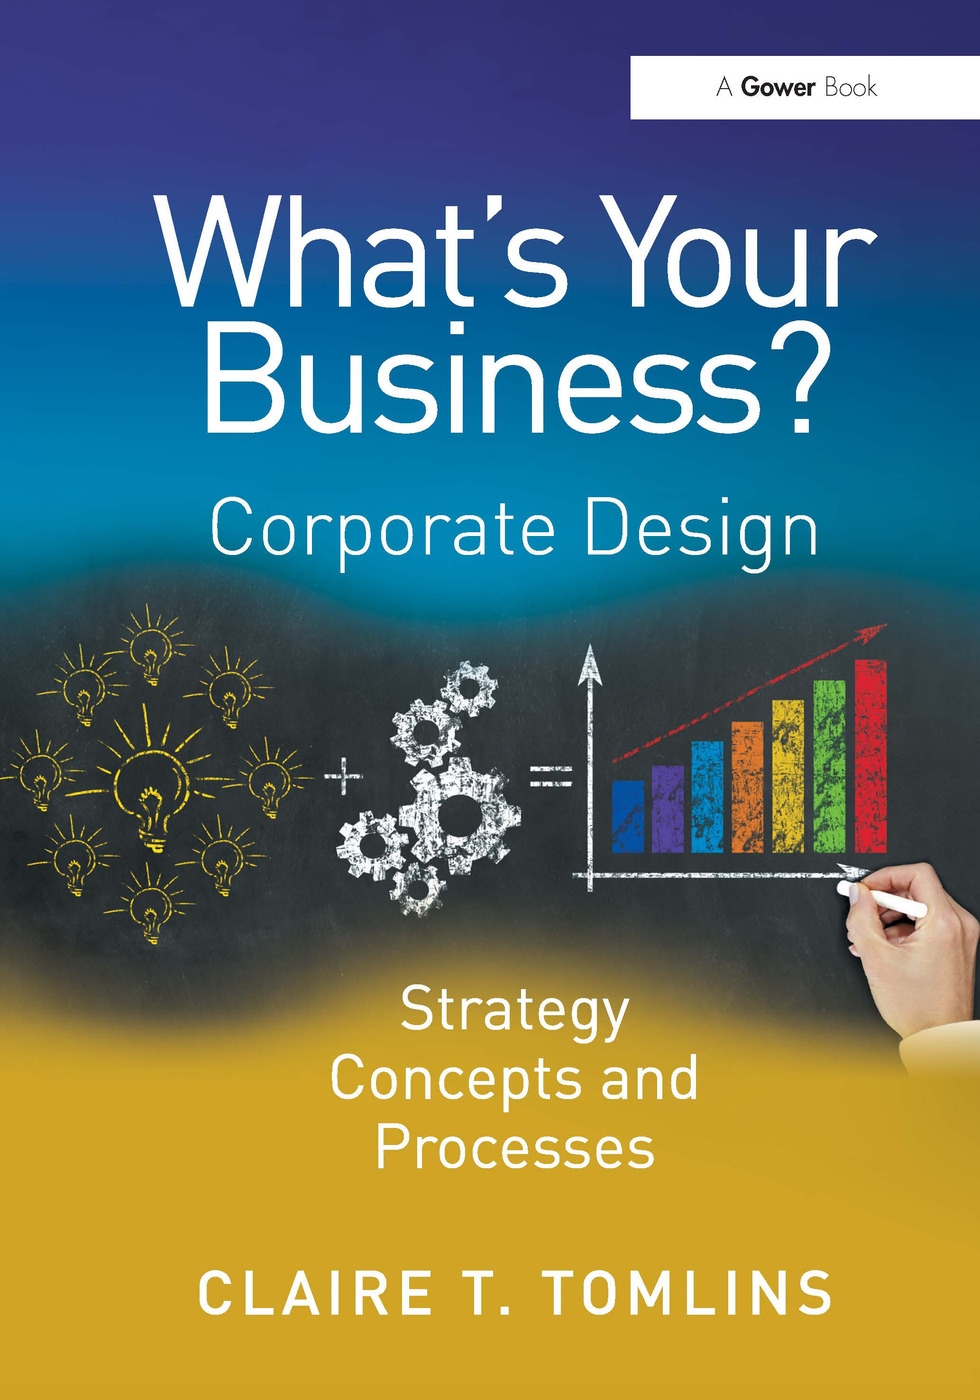 What’s Your Business?: Corporate Design Strategy Concepts and Processes